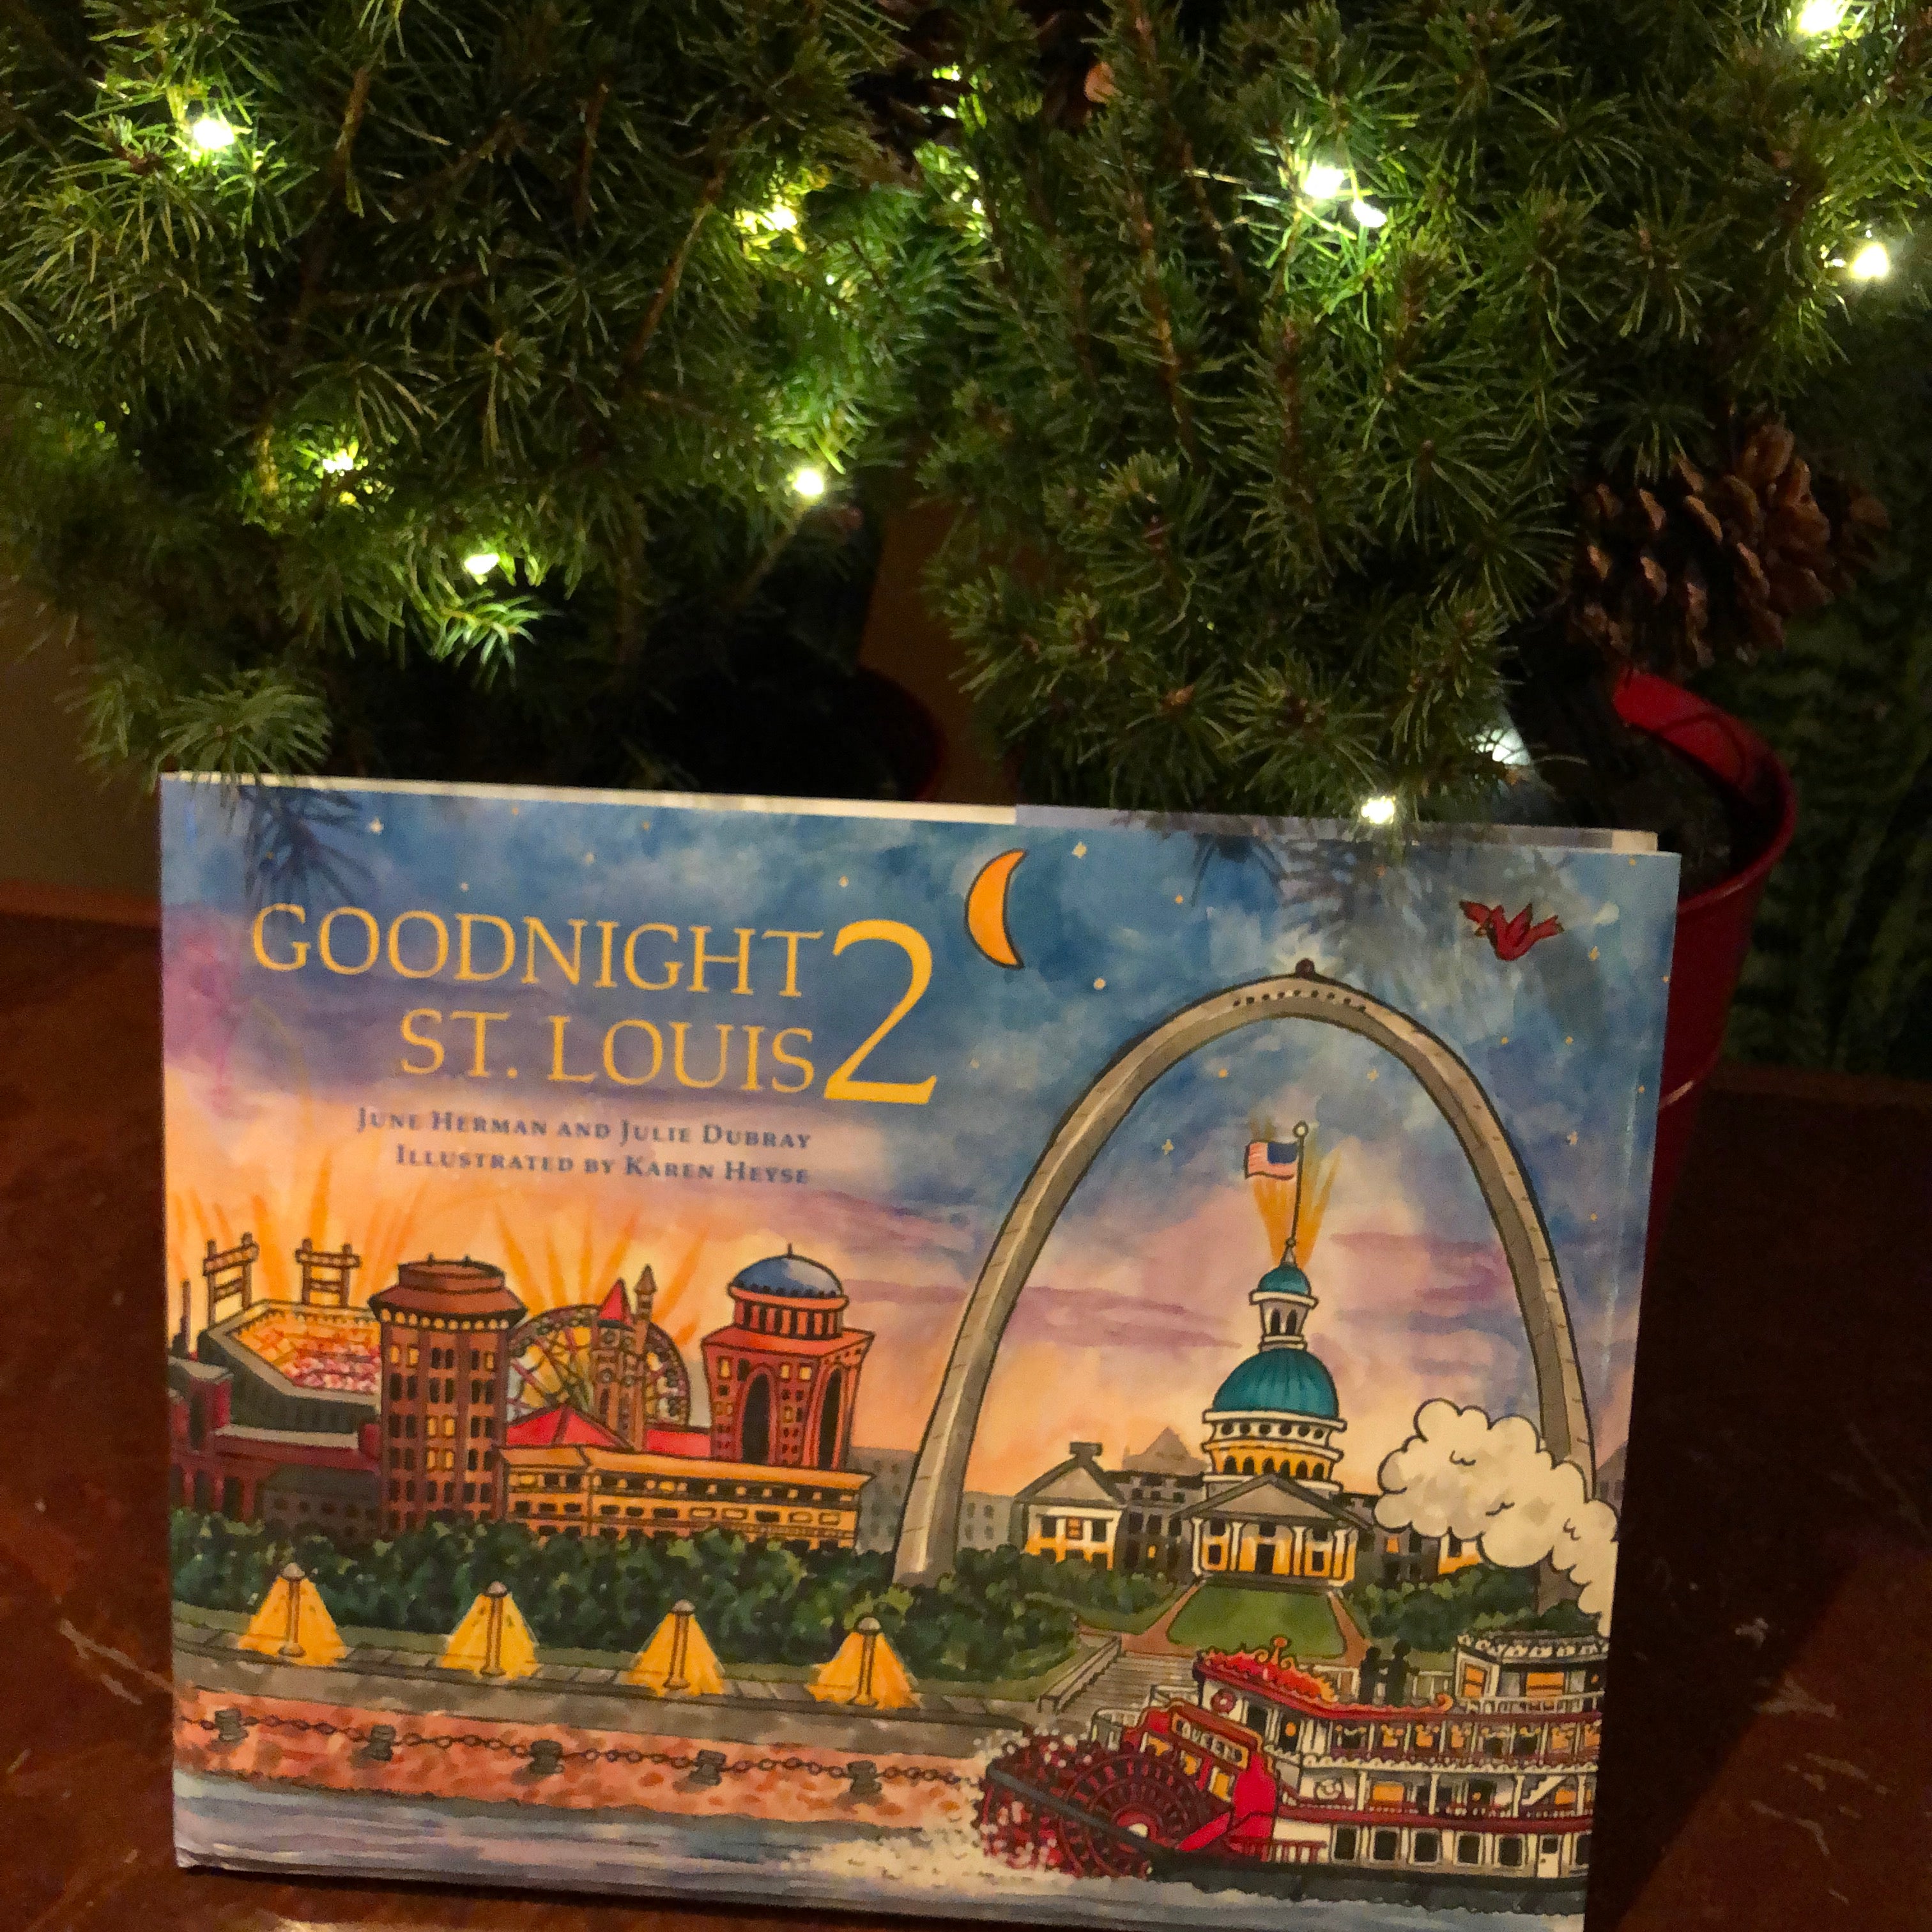 Shop Local--Goodnight 2 St Louis Fans!